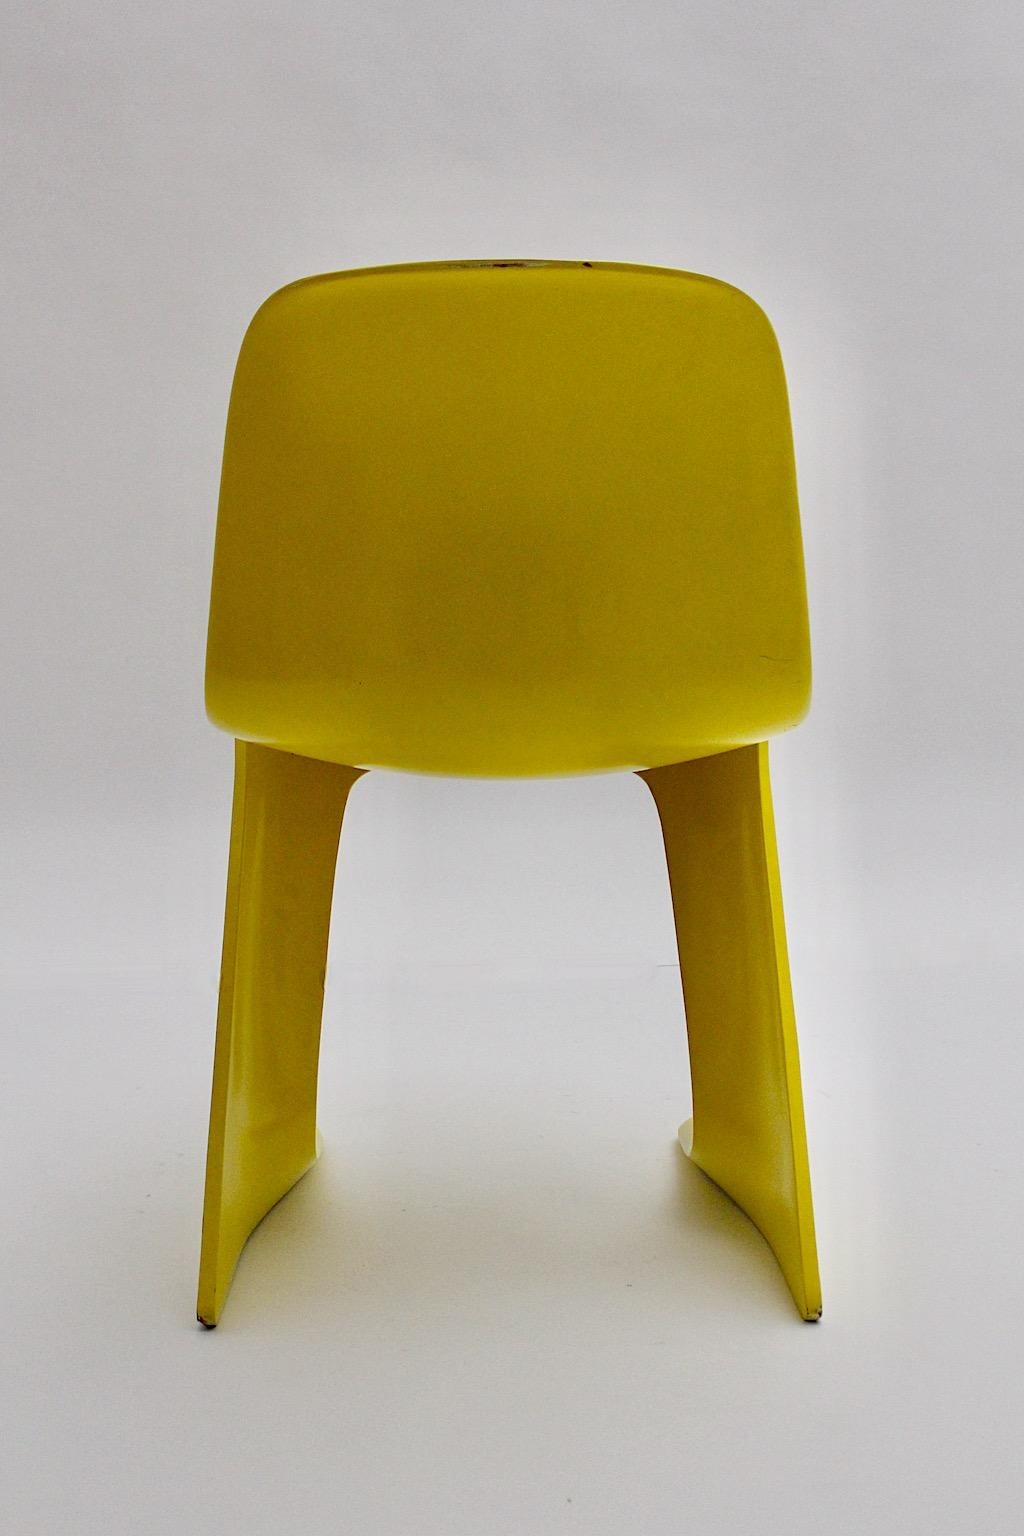 Space Age Vintage Yellow Plastic Chair Kangaroo Chair Ernst Moeckl 1960s Germany For Sale 9